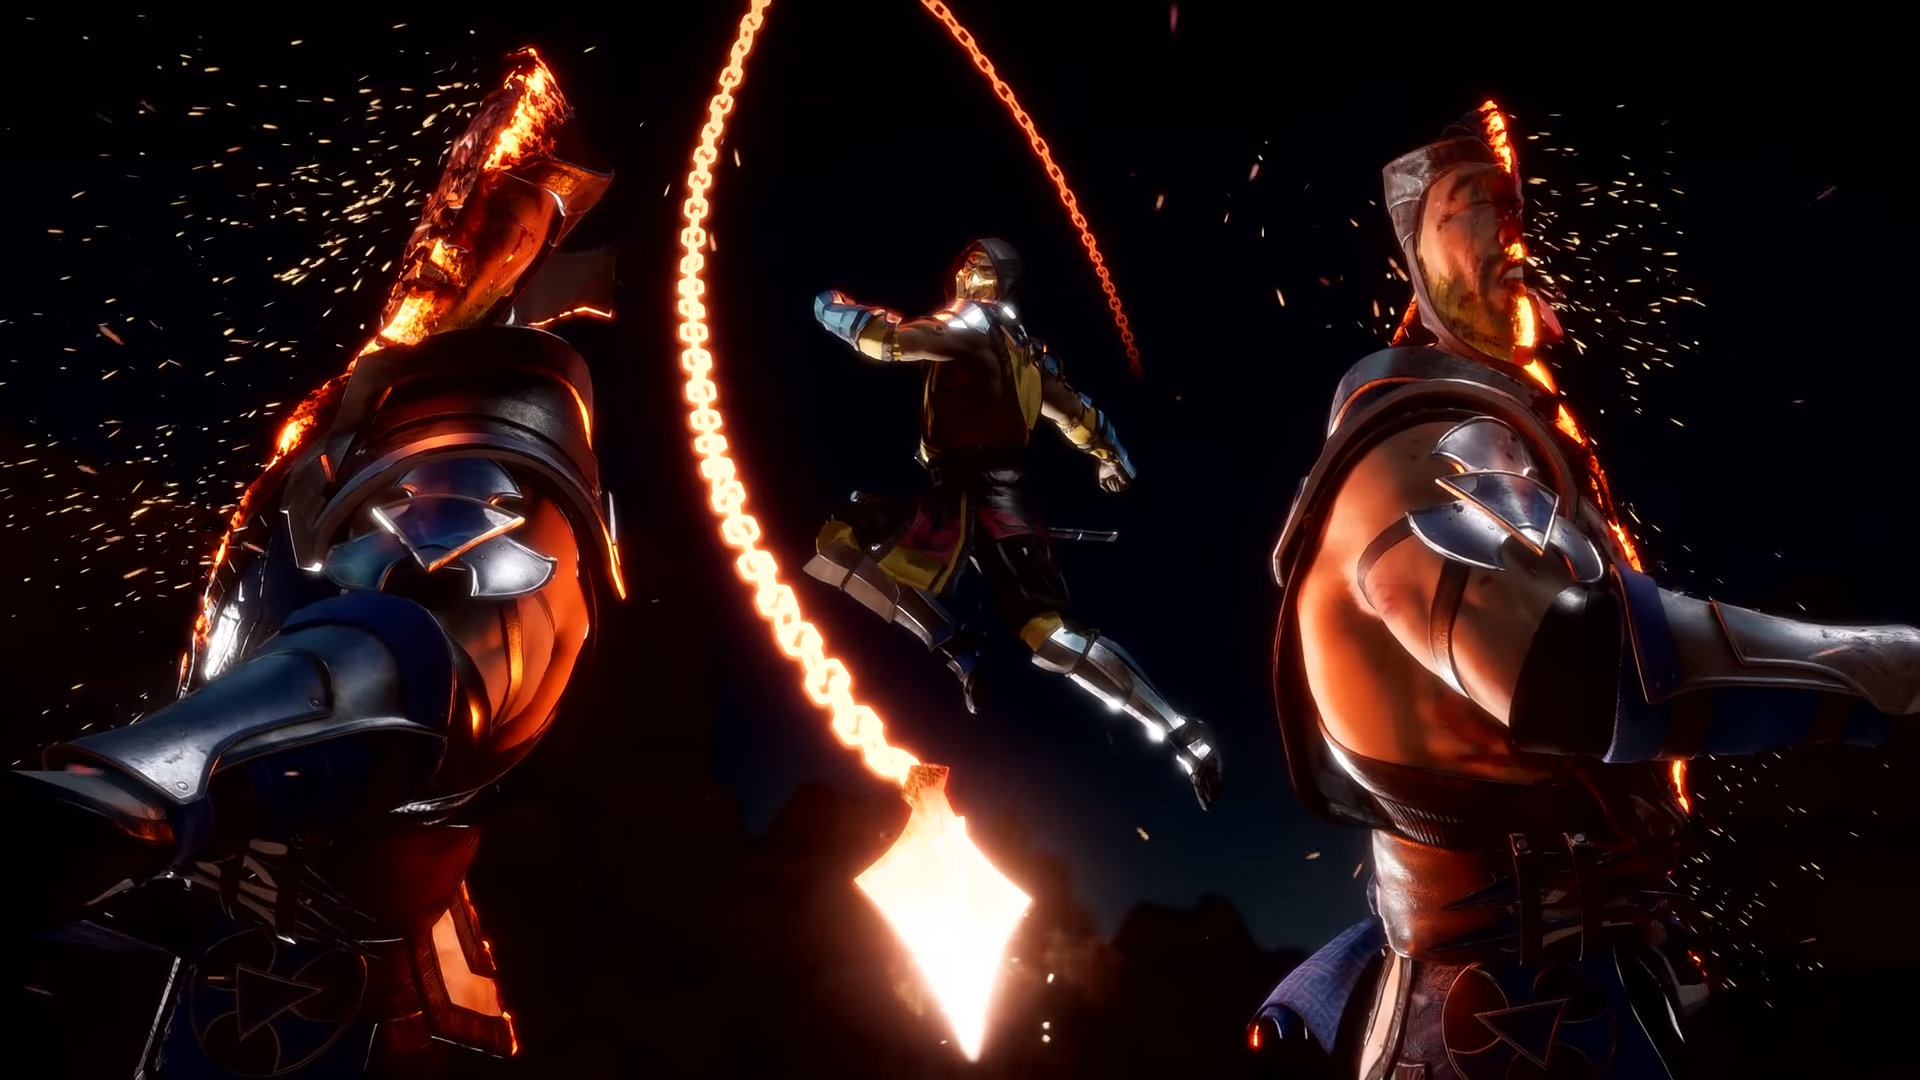 This screenshot I took from Scorpions fatality is pretty serious